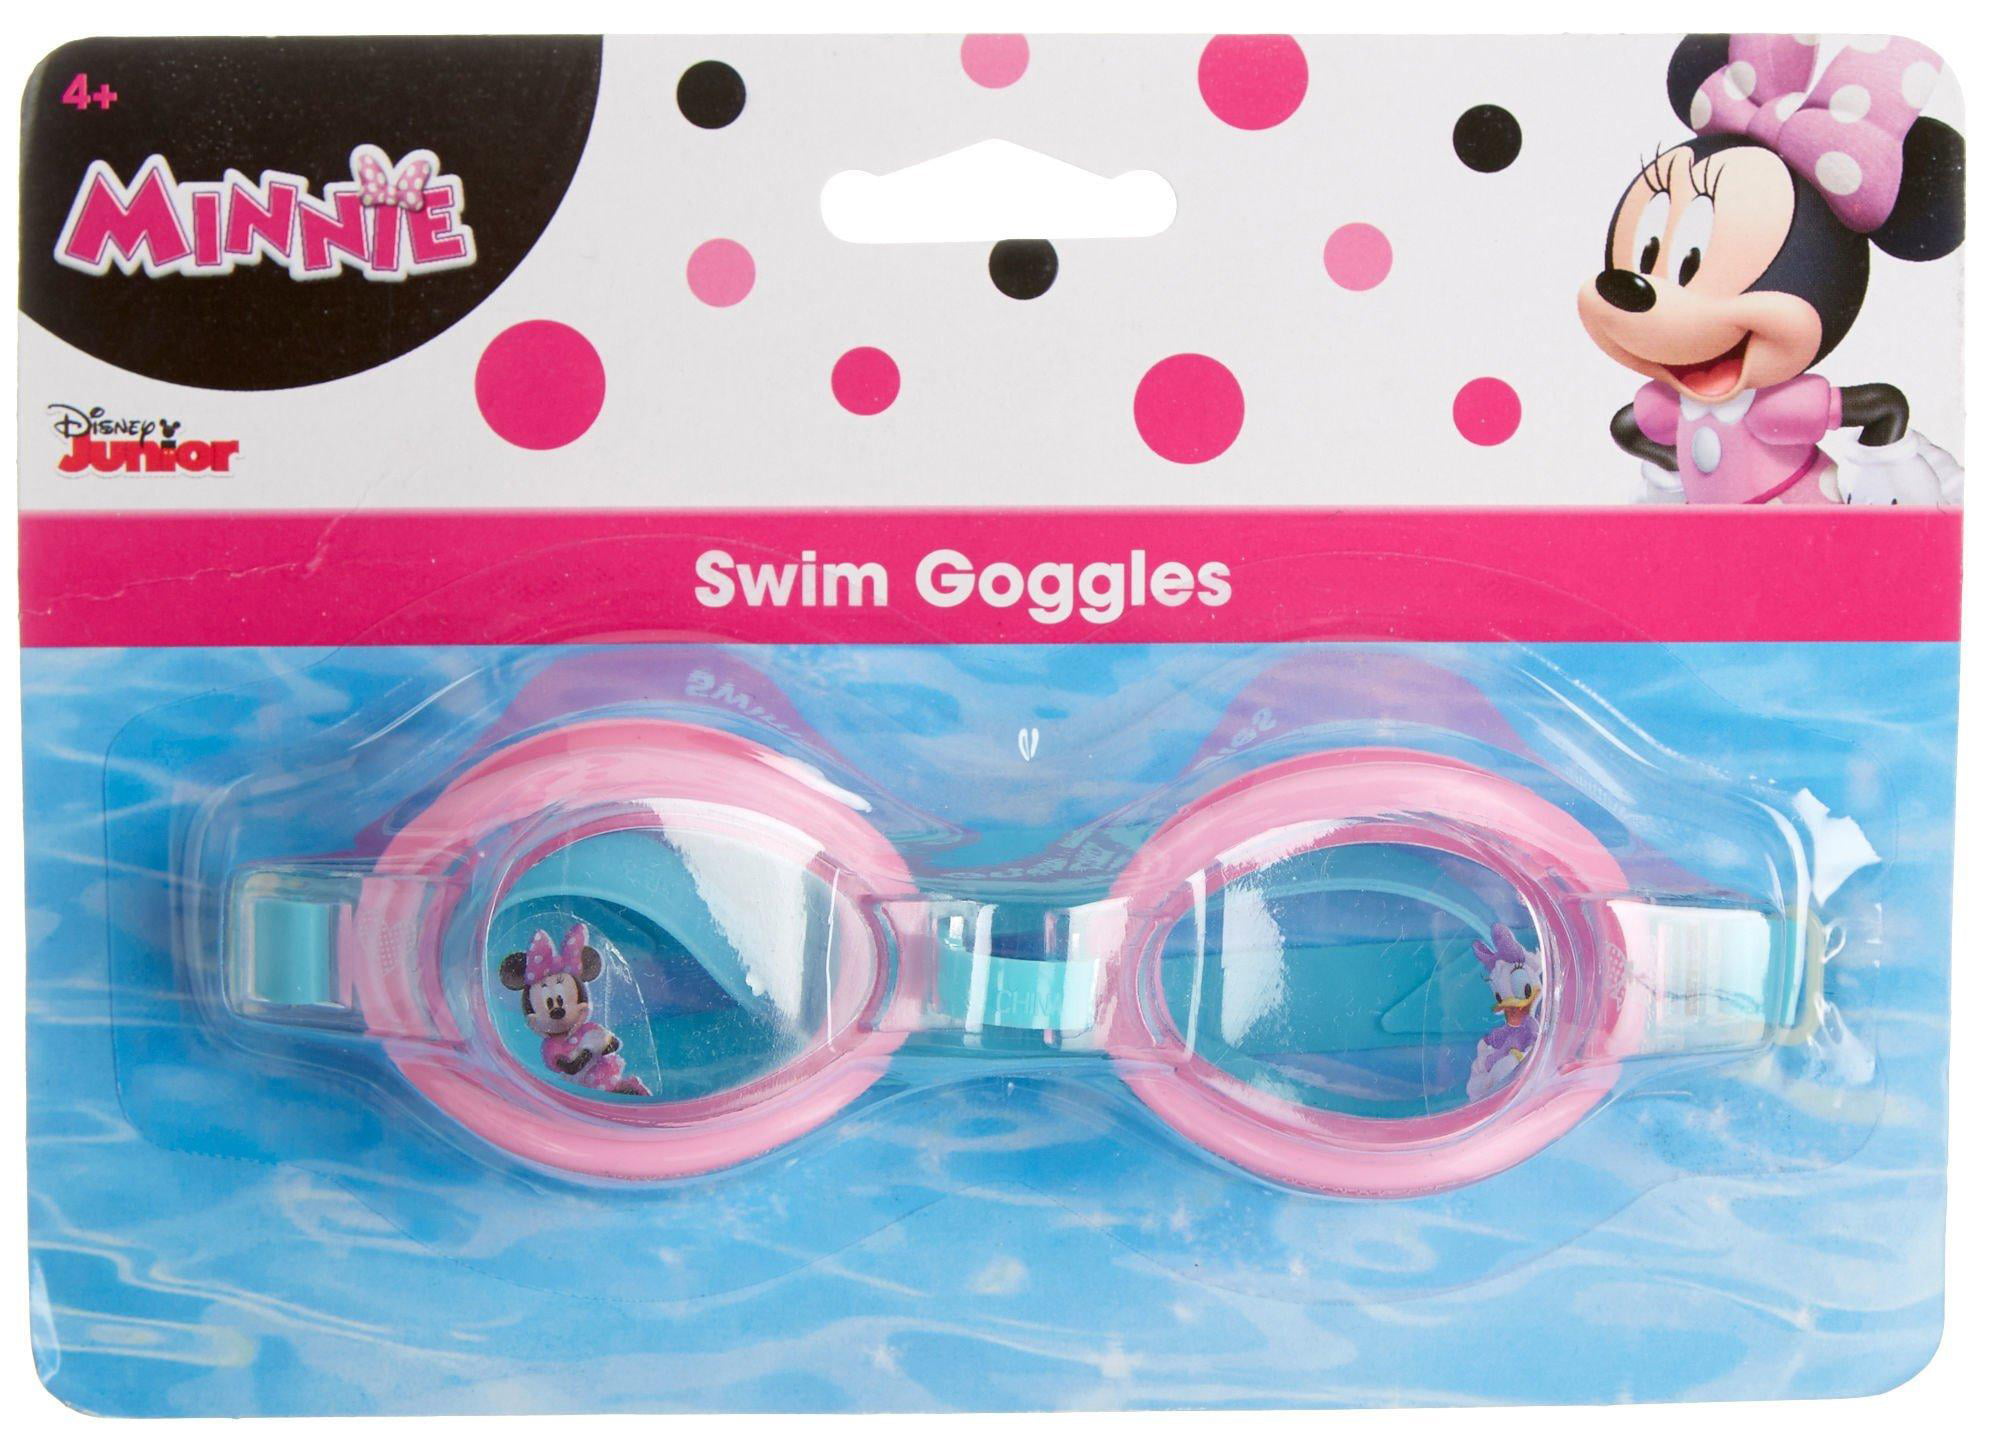 Details about   Disney Minnie Mouse Swim Goggles Swimwear Eye Protection New Daisy Duck 